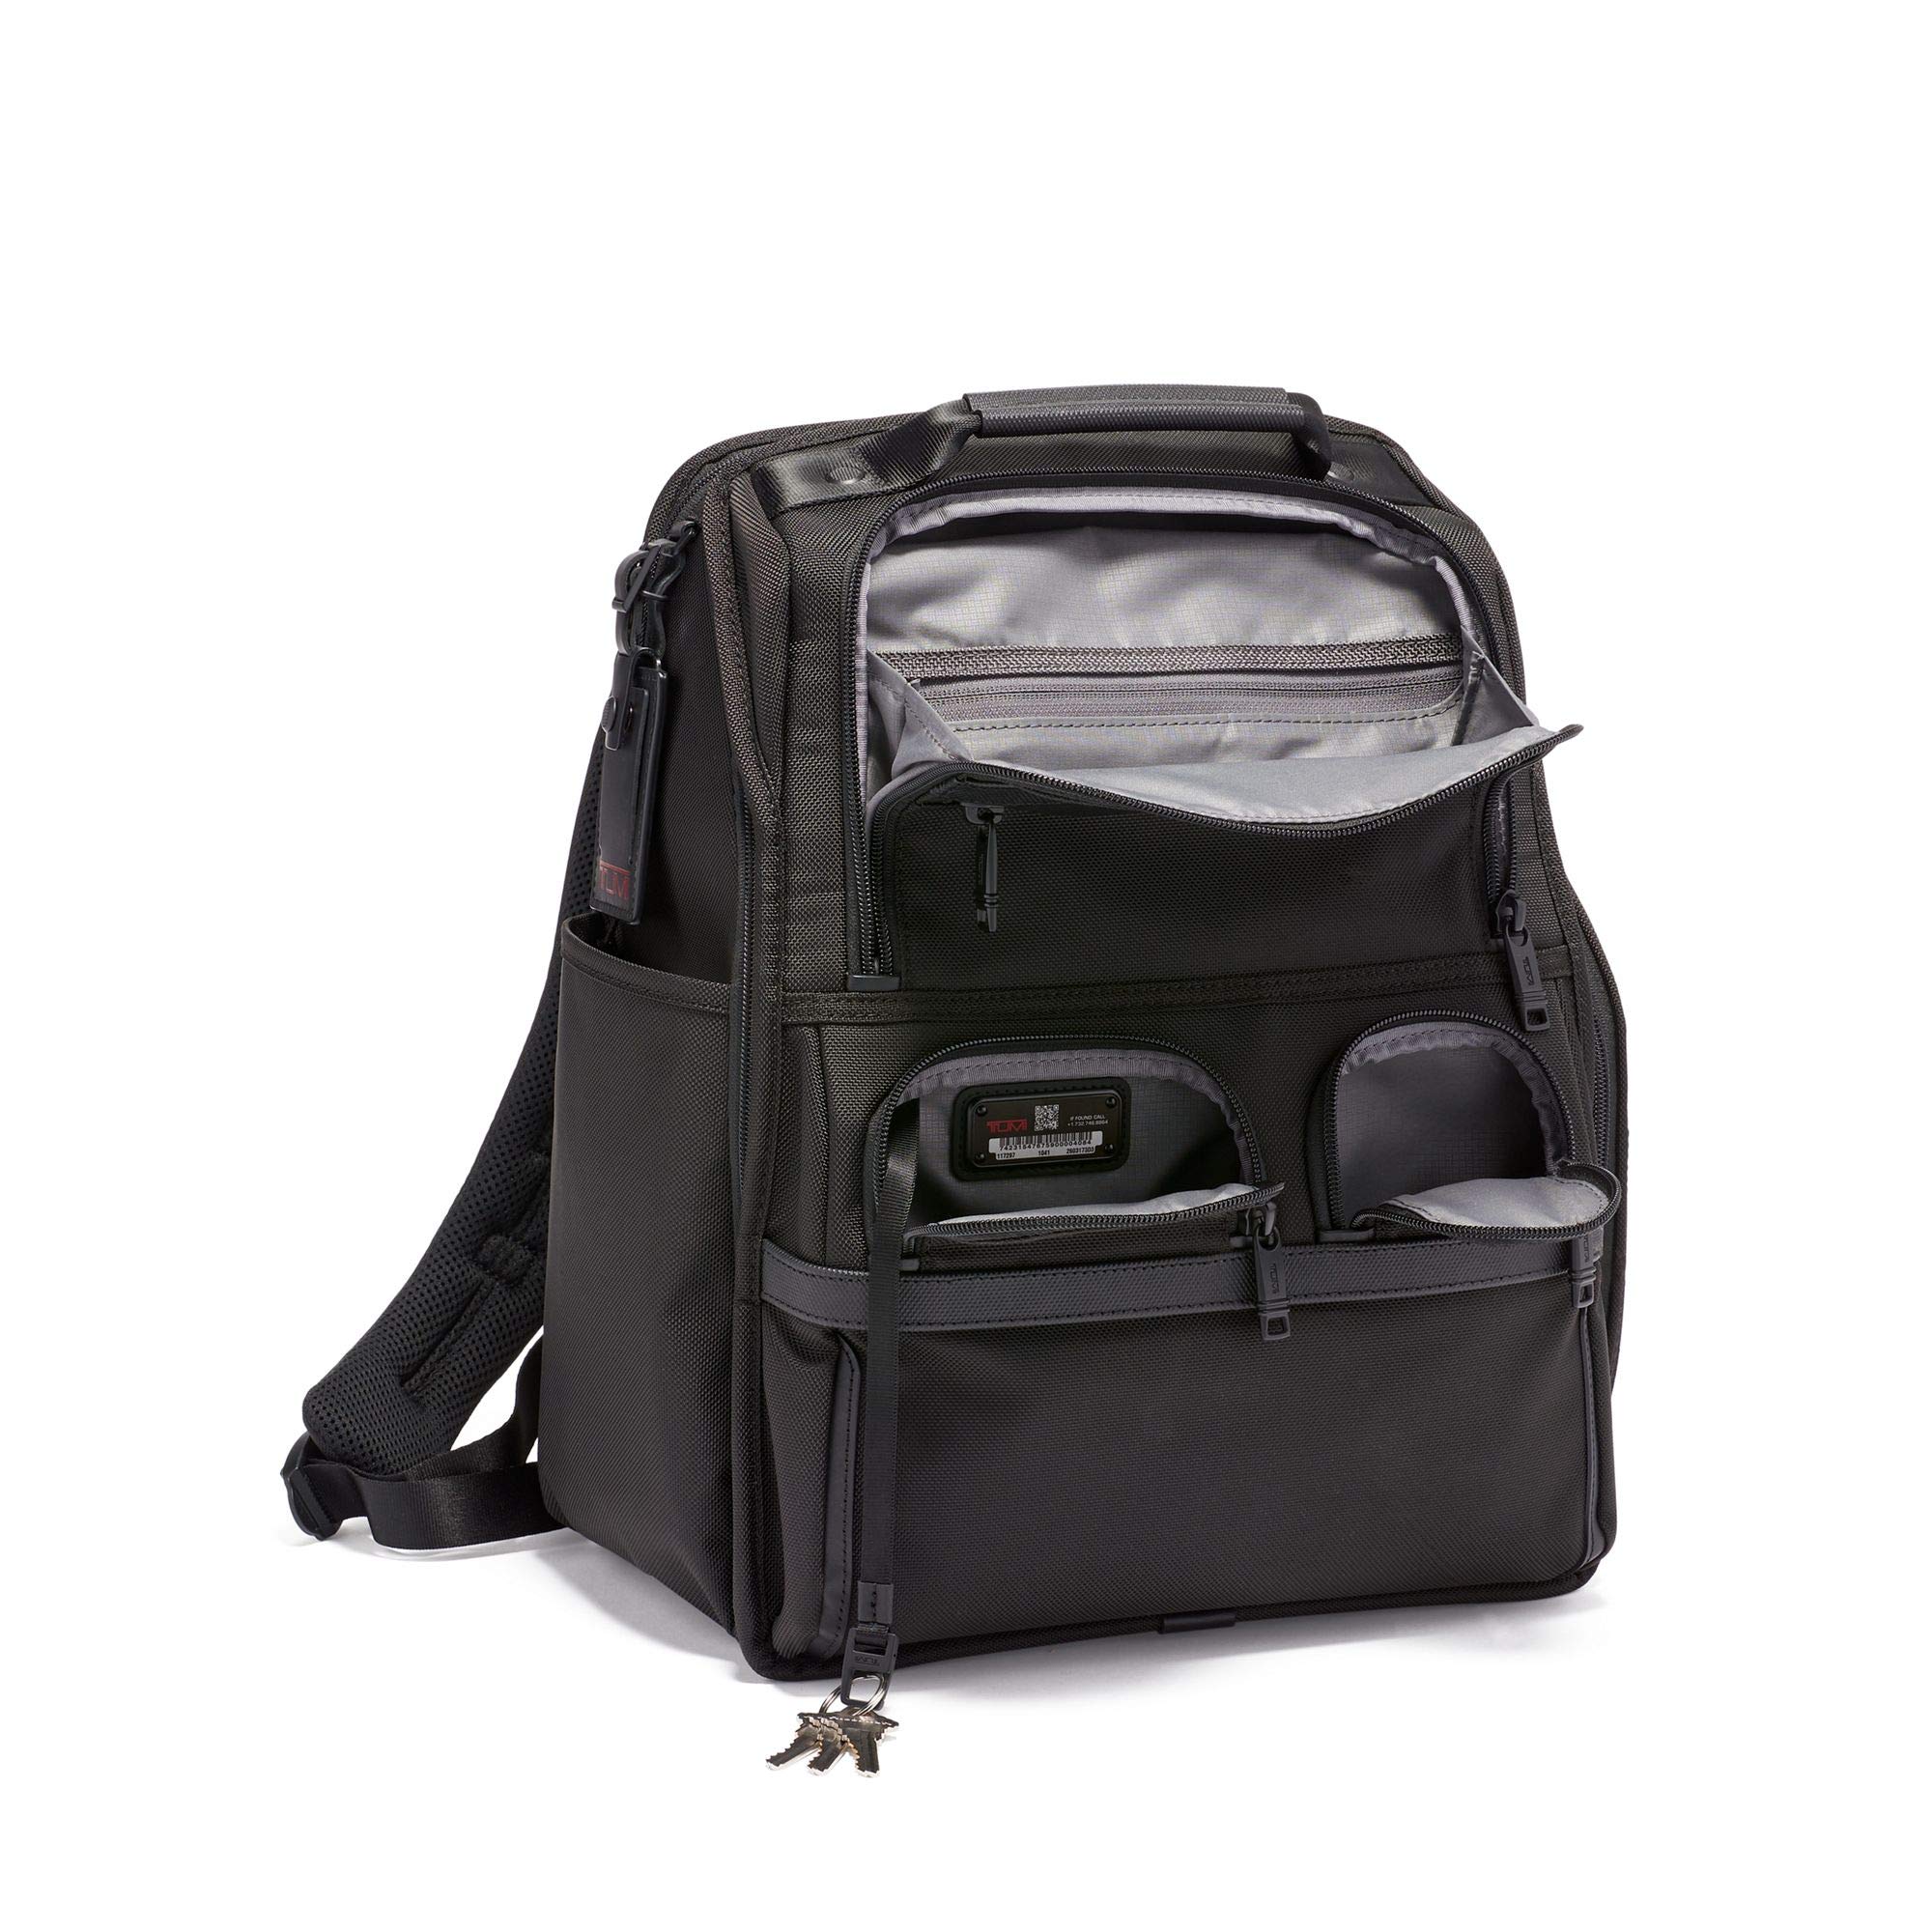 TUMI Alpha 3 Compact Laptop Brief Pack - For Commuters and Business Travelers - 15-Inch Computer Backpack for Men and Women - Black